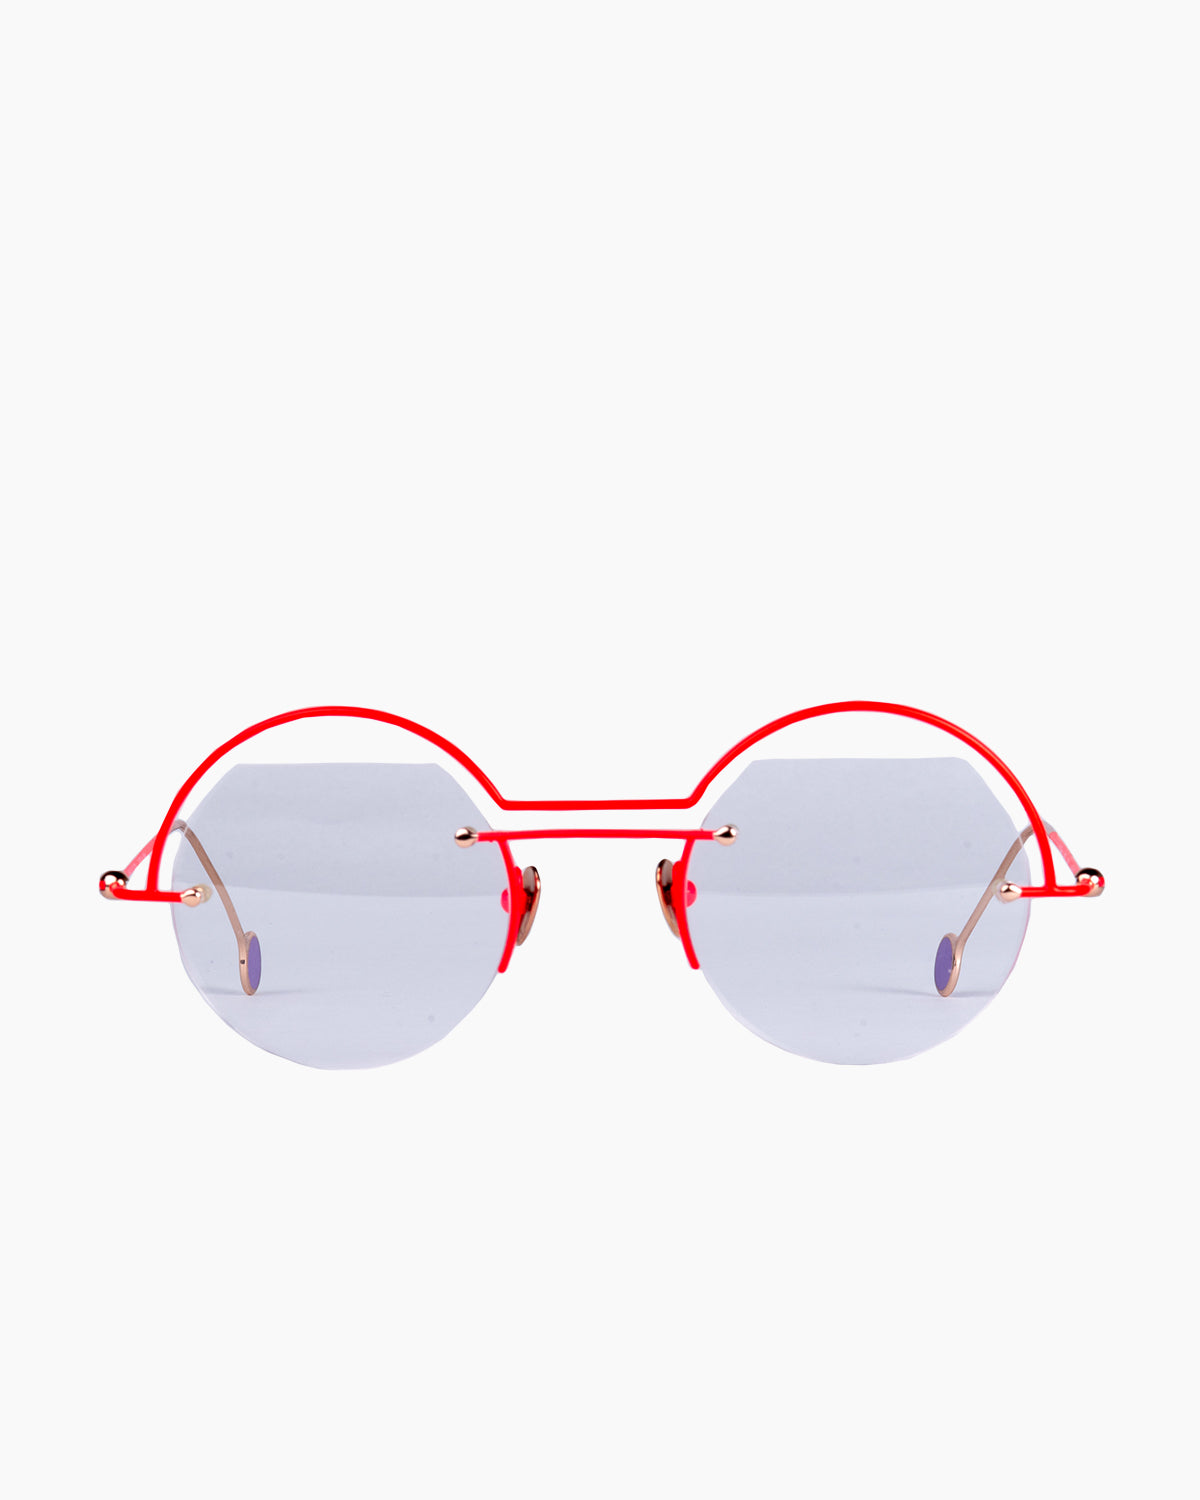 Anne and Valentin - CODE - 22A14 | glasses bar:  Marie-Sophie Dion